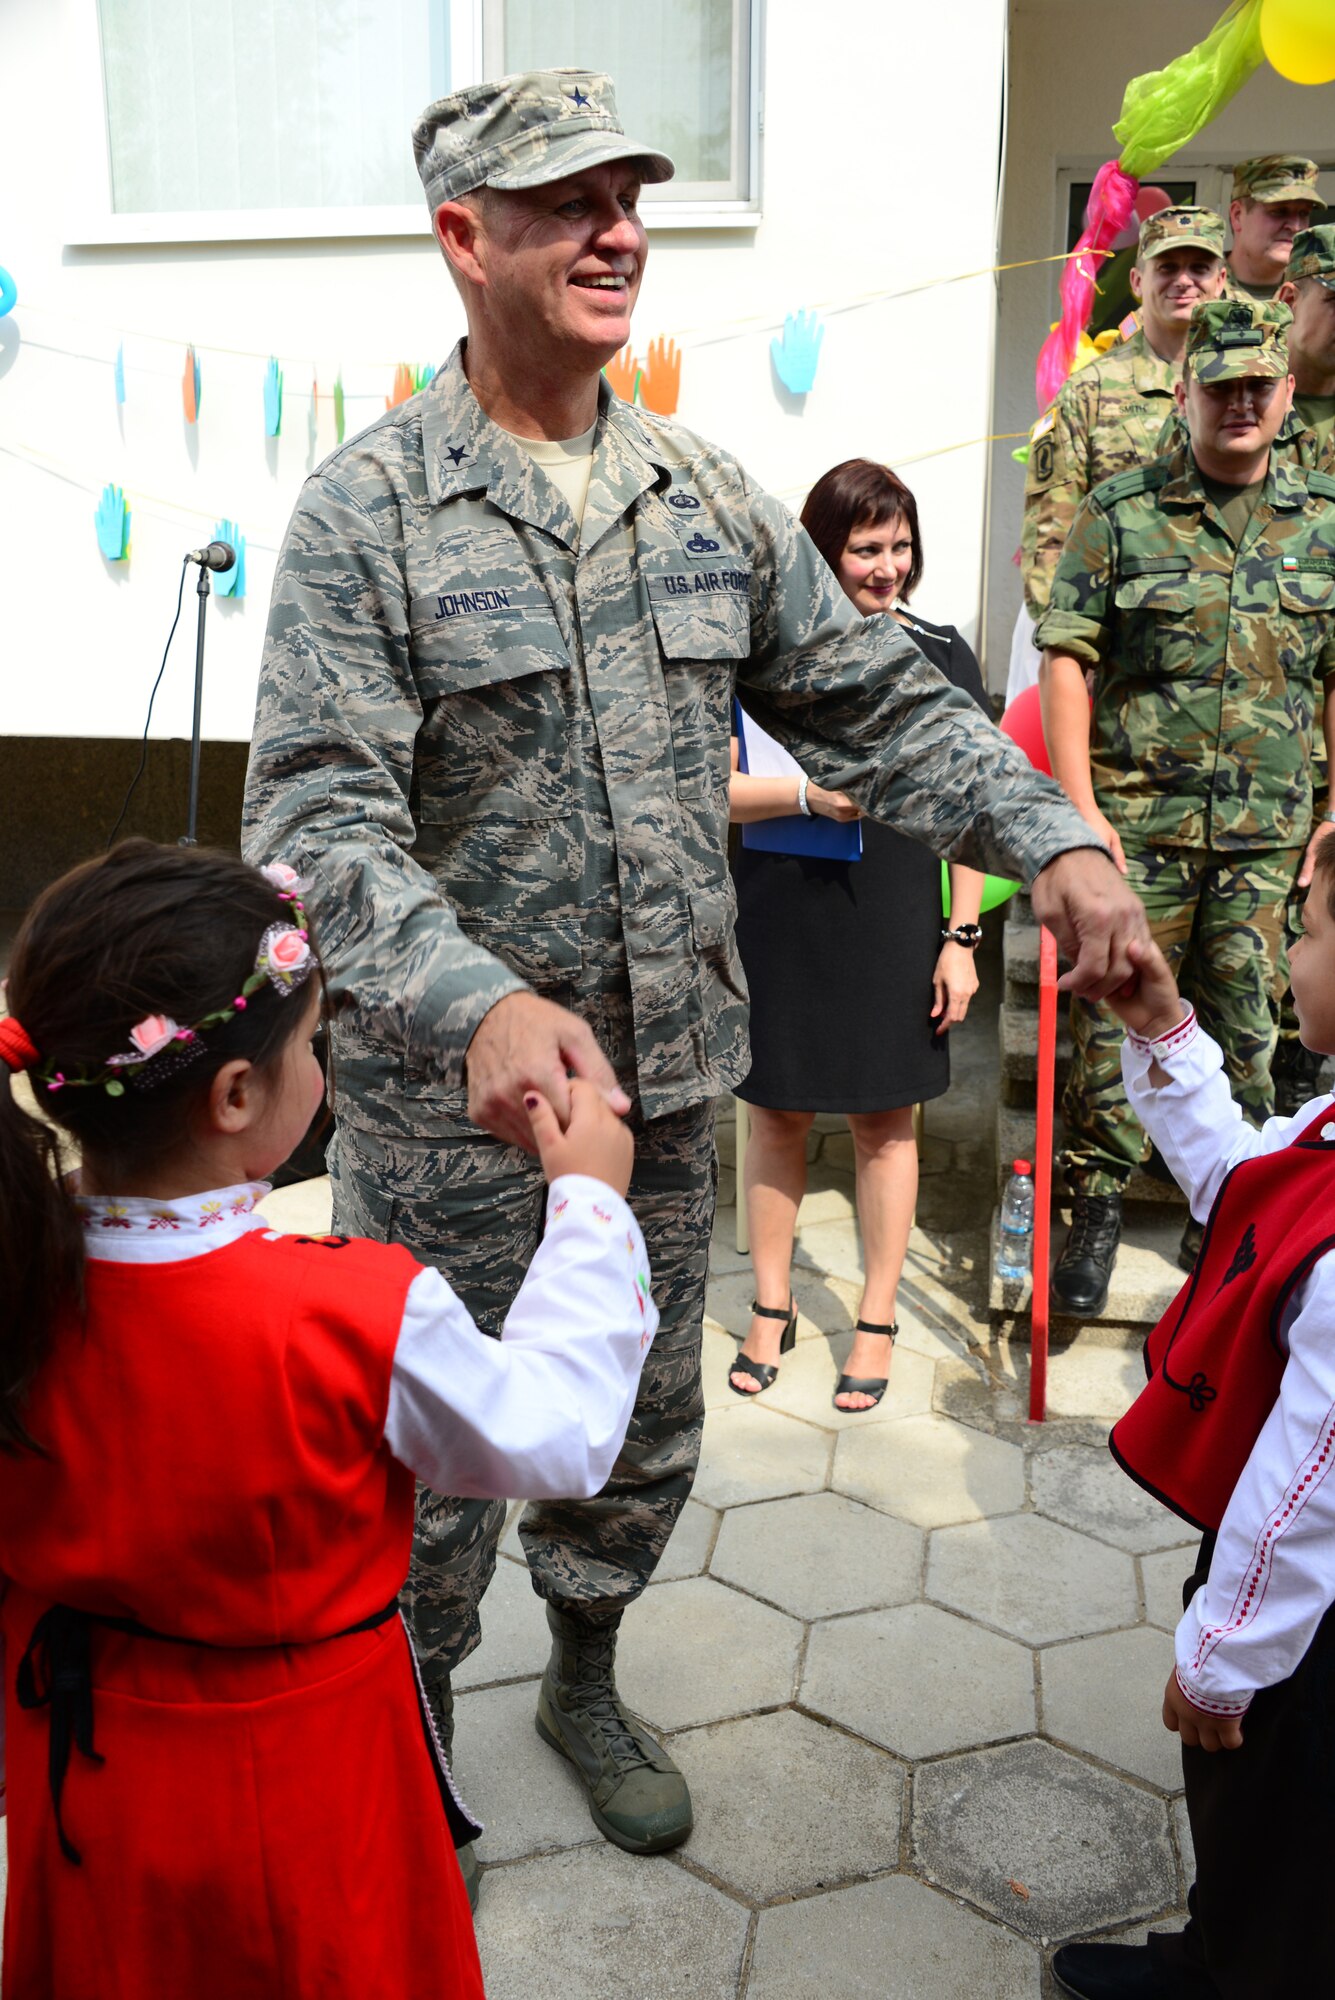 Brig. Gen. Donald Johnson, Assistant Adjutant Gen. (Air), Tennessee, dance with Bulgarian students at the grand re-opening of the Izvorche Kindergarten school in Kabile, Bulgaria, Aug. 24, 2016.  Tennessee National Guard Soldiers and Airmen from the 164th Civil Engineer Squadron, 118th Mission Support Group, 134th Air Refueling Wing, and the 194th Engineer Brigade deployed to nearby Novo Selo Training Area for thier annual training to participate in Humanitarian Civic Assistance projects such as the renovation of the school.  The projects build skills for the Airmen while helping to strengthen ties with Tennessee and Bulgaria through the State Partnership Program.  (U.S. Air National Guard photo by Master Sgt. Kendra M. Owenby, 134 ARW Public Affairs)